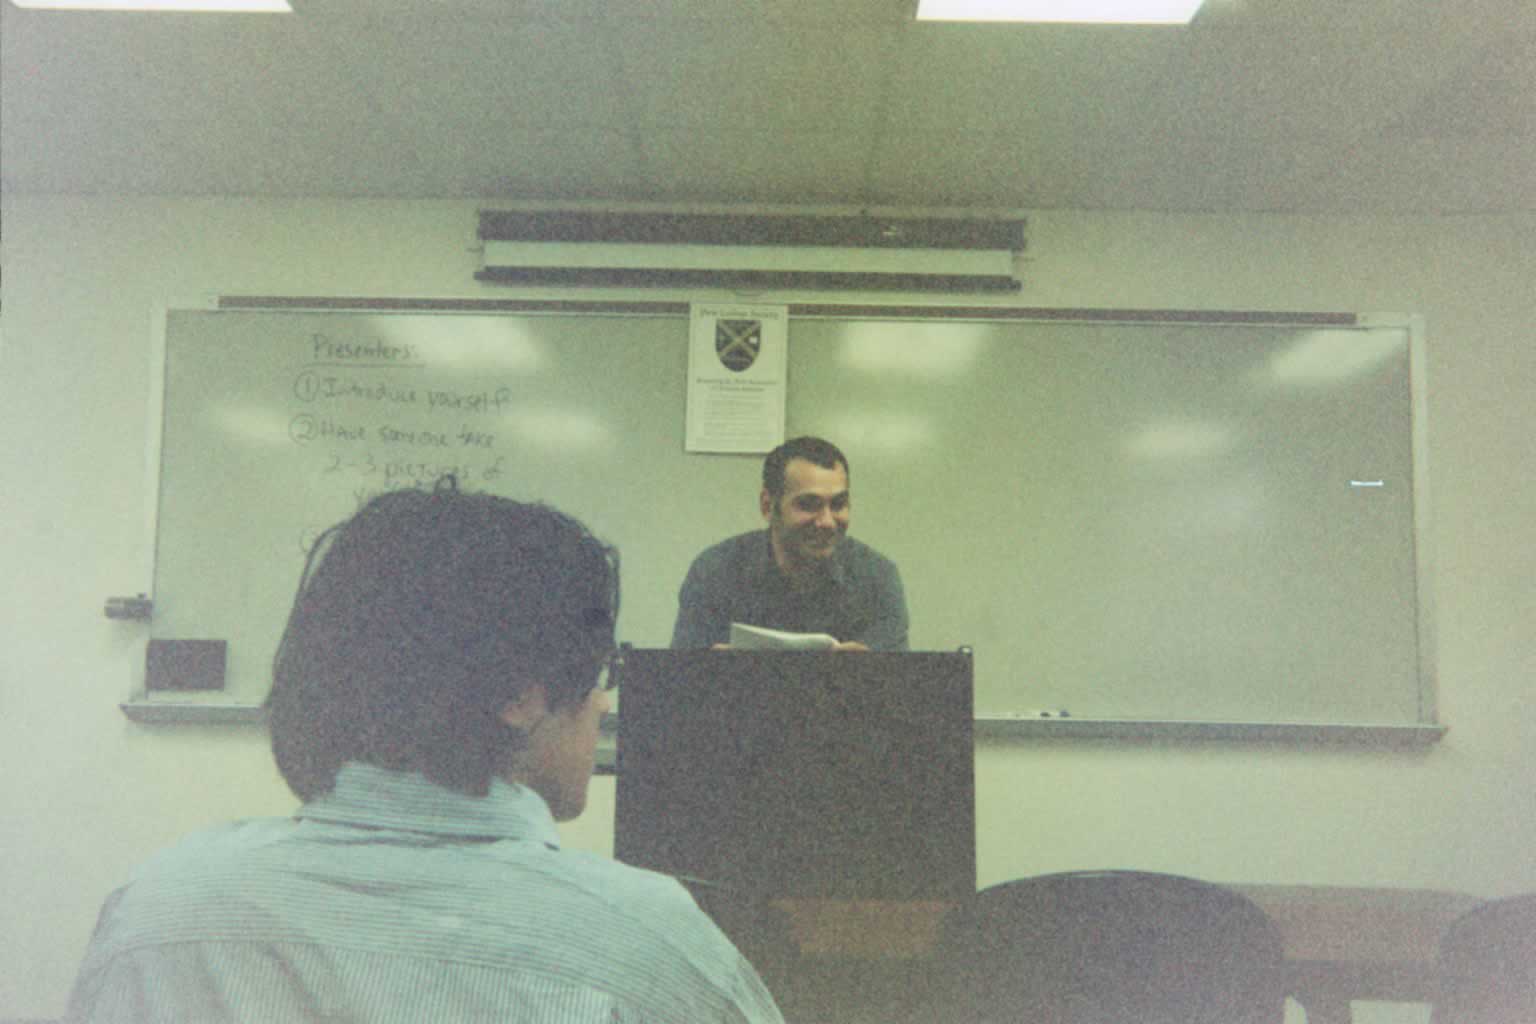 man standing behind a podium talking with the back of a man's head at the bottom of the picture